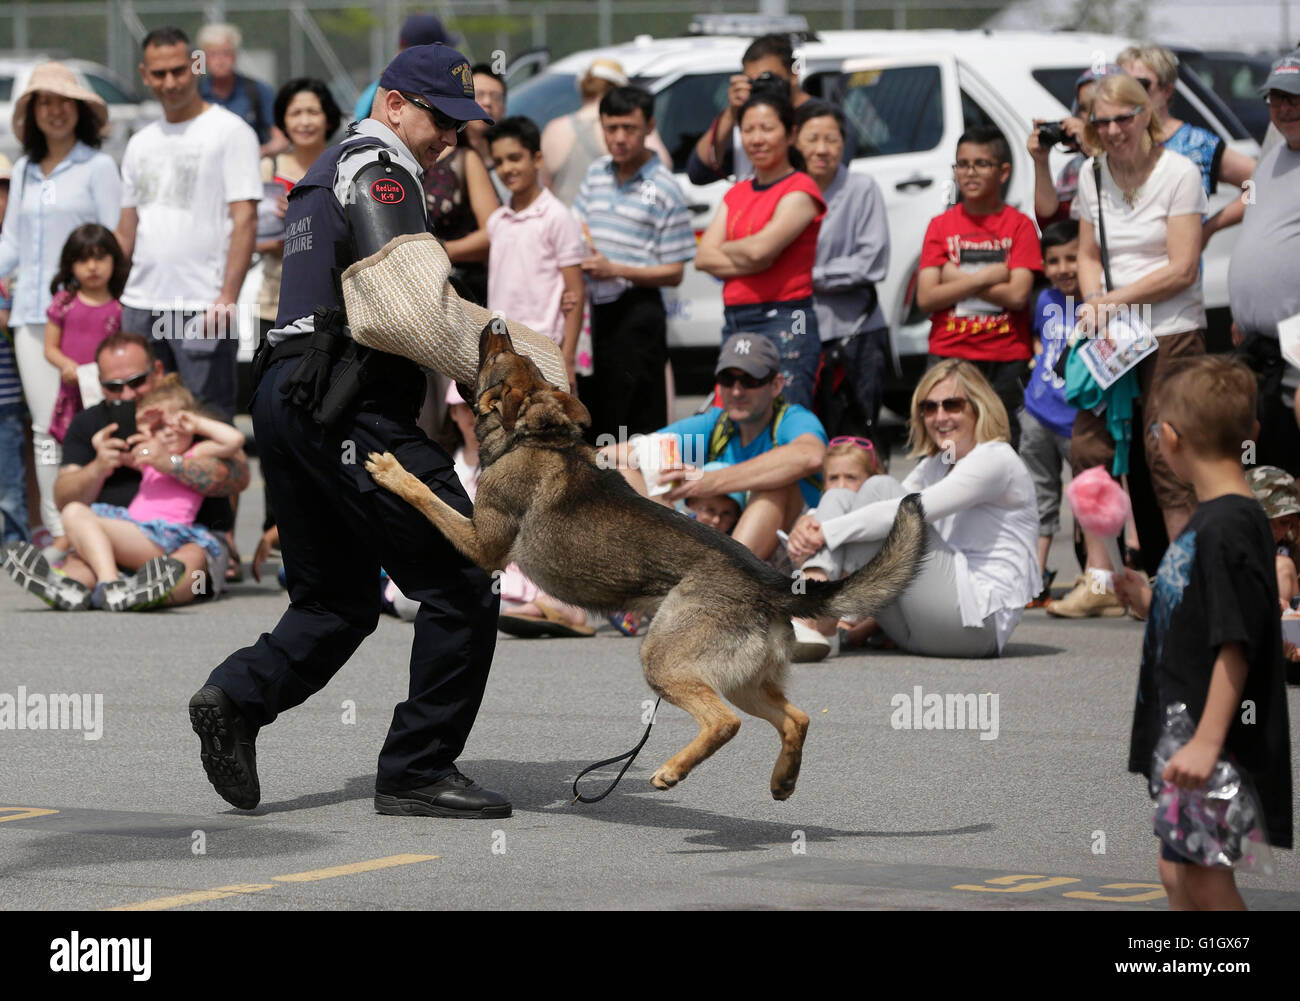 (160515) -- VANCOUVER, May 15, 2016 (Xinhua) -- Residents watch a police dog demonstartion during an open house event in celebration of the annual national police week at the Royal Canadian Mounted Police (RCMP)'s main detachment in Surrey, Canada, May 14, 2016. (Xinhua/Liang Sen) Stock Photo